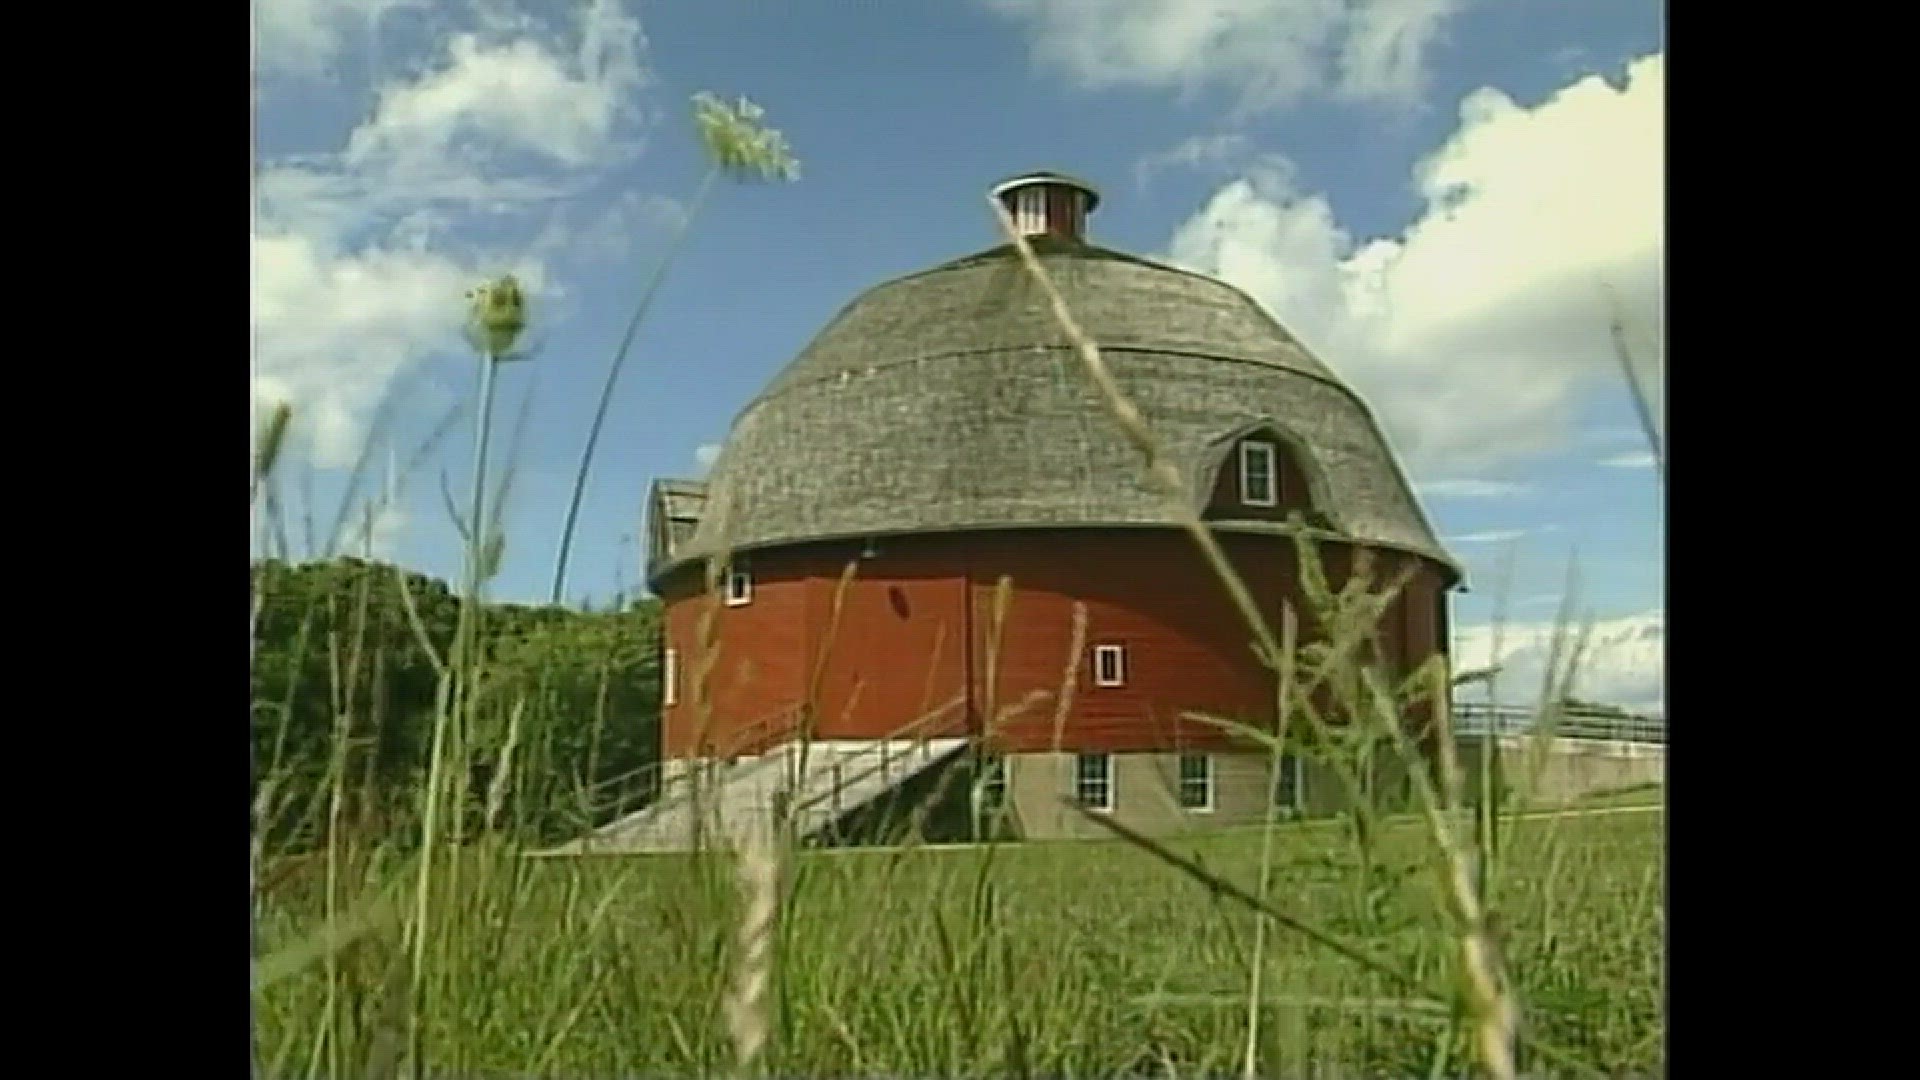 Back in 2001, News 8's Vanessa Van Hyfte spoke with Loren Treninger, a tour guide at the barn.